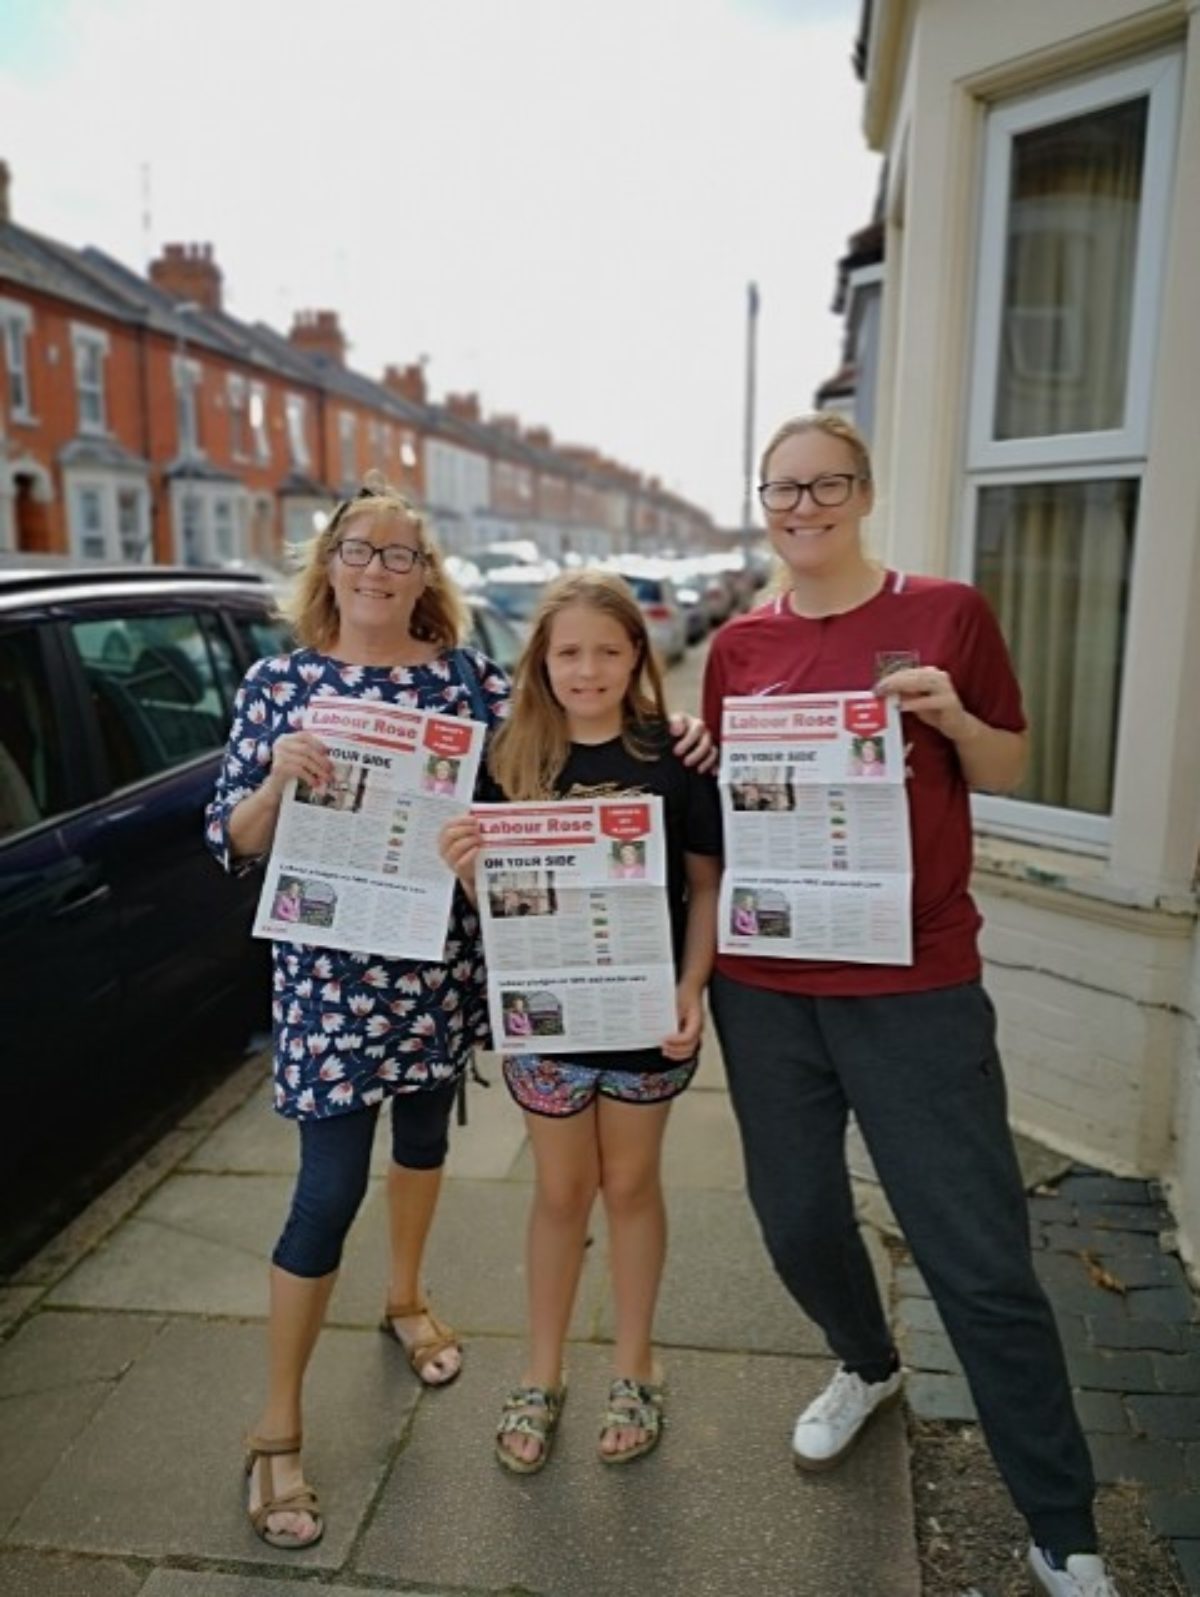 Thanks to Sally Quinn and family - leafleting in the sunshine